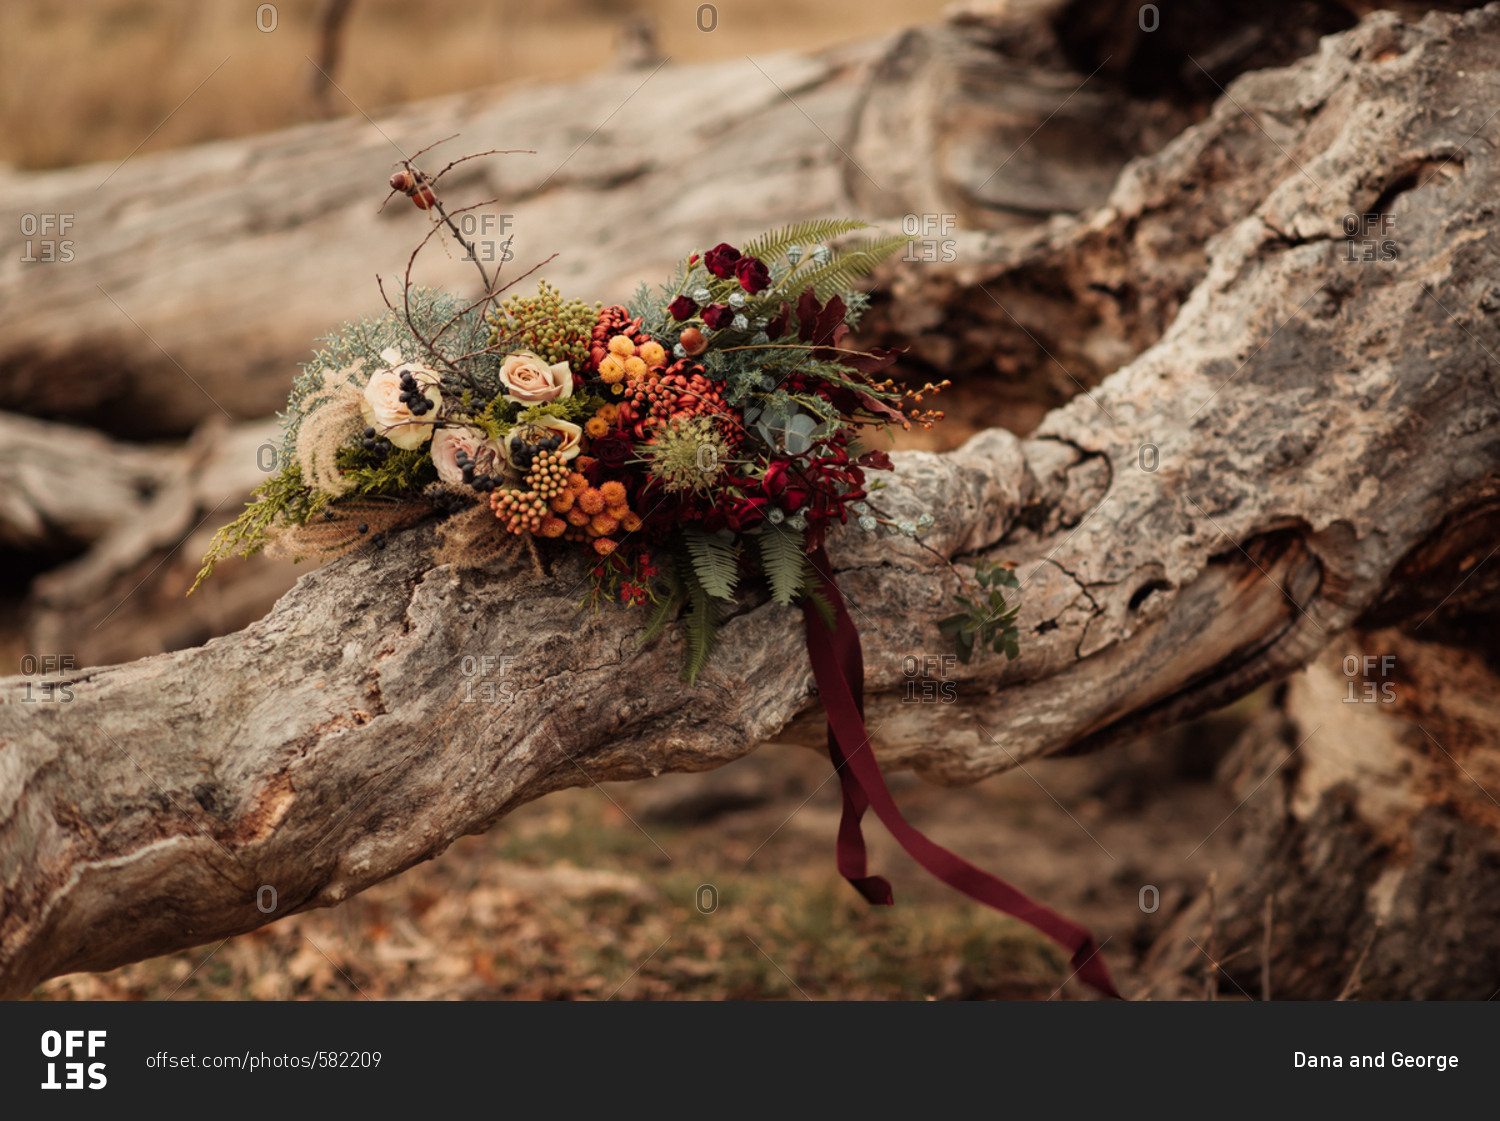 Woodland bouquet of flowers and plants resting on a weathered fallen log